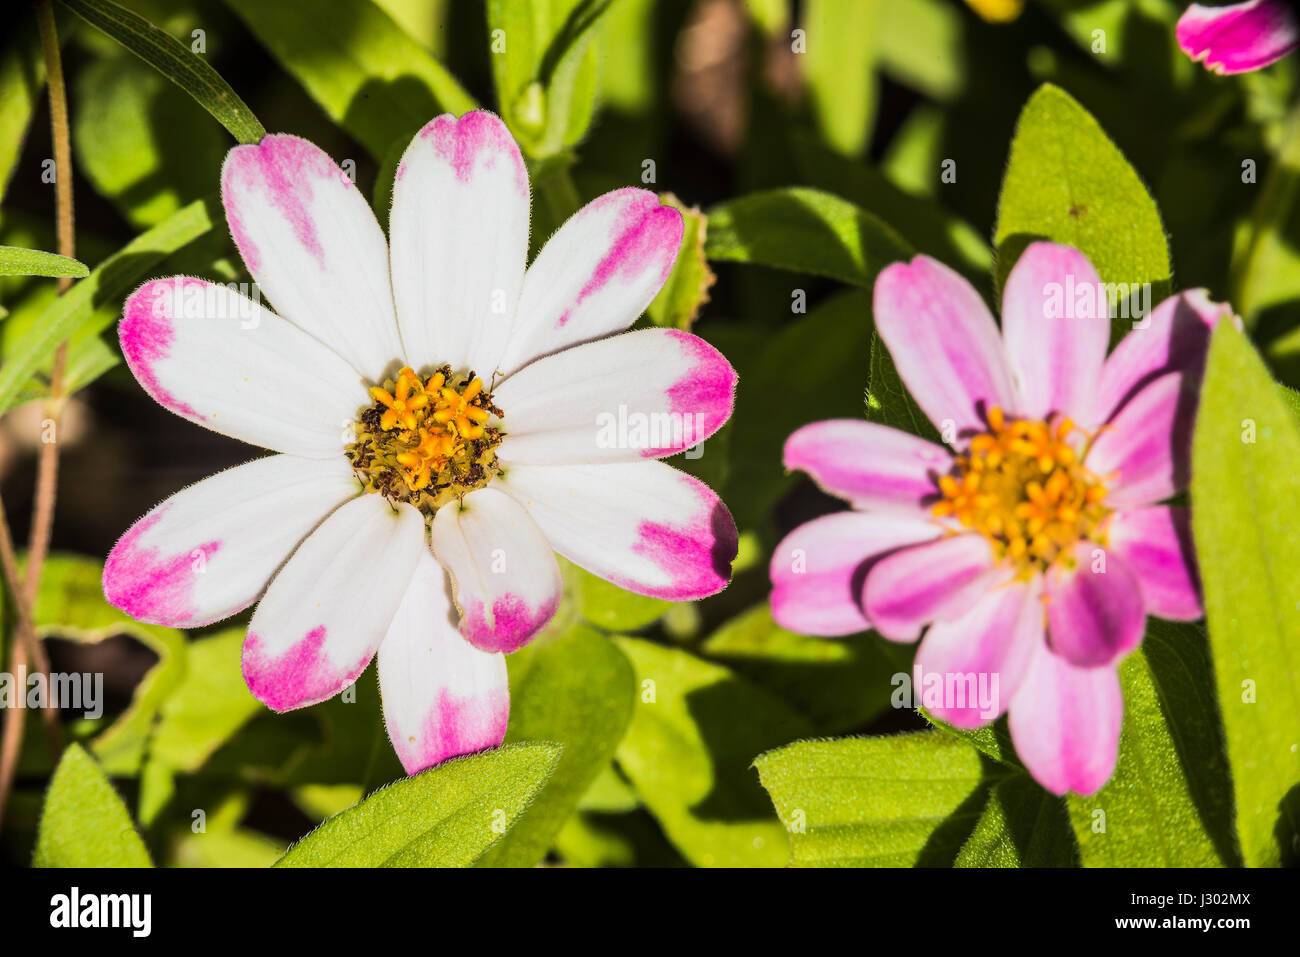 Macro closeup of white and pink daisy flowers in colorful garden Stock Photo